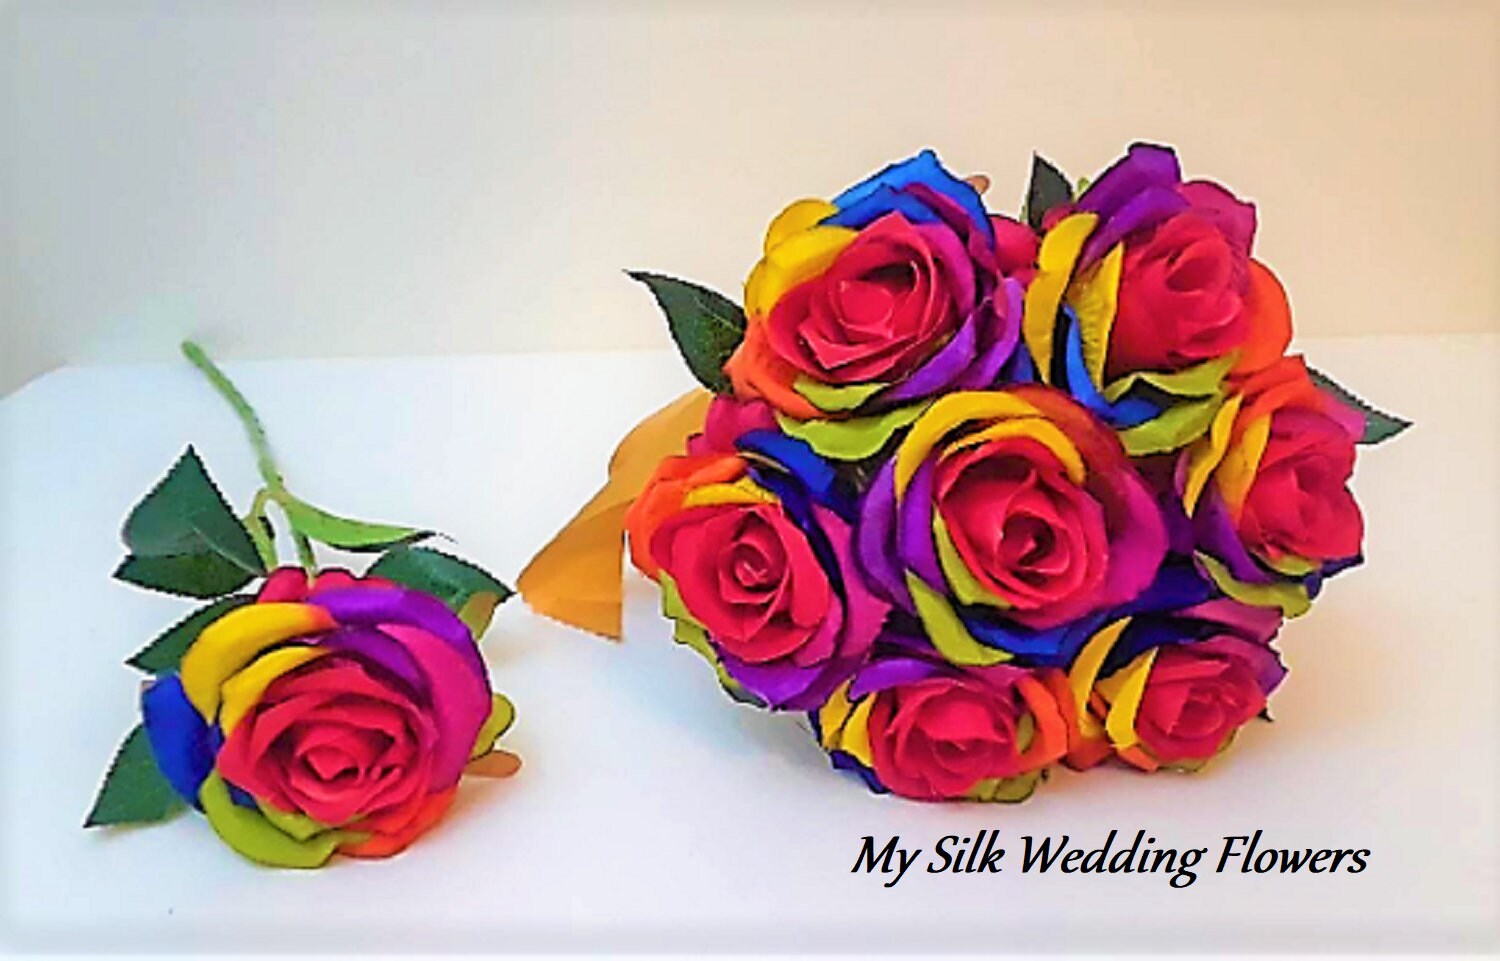 Ribbon Rose Wedding Bouquet · How To Make A Bouquet · Needlework